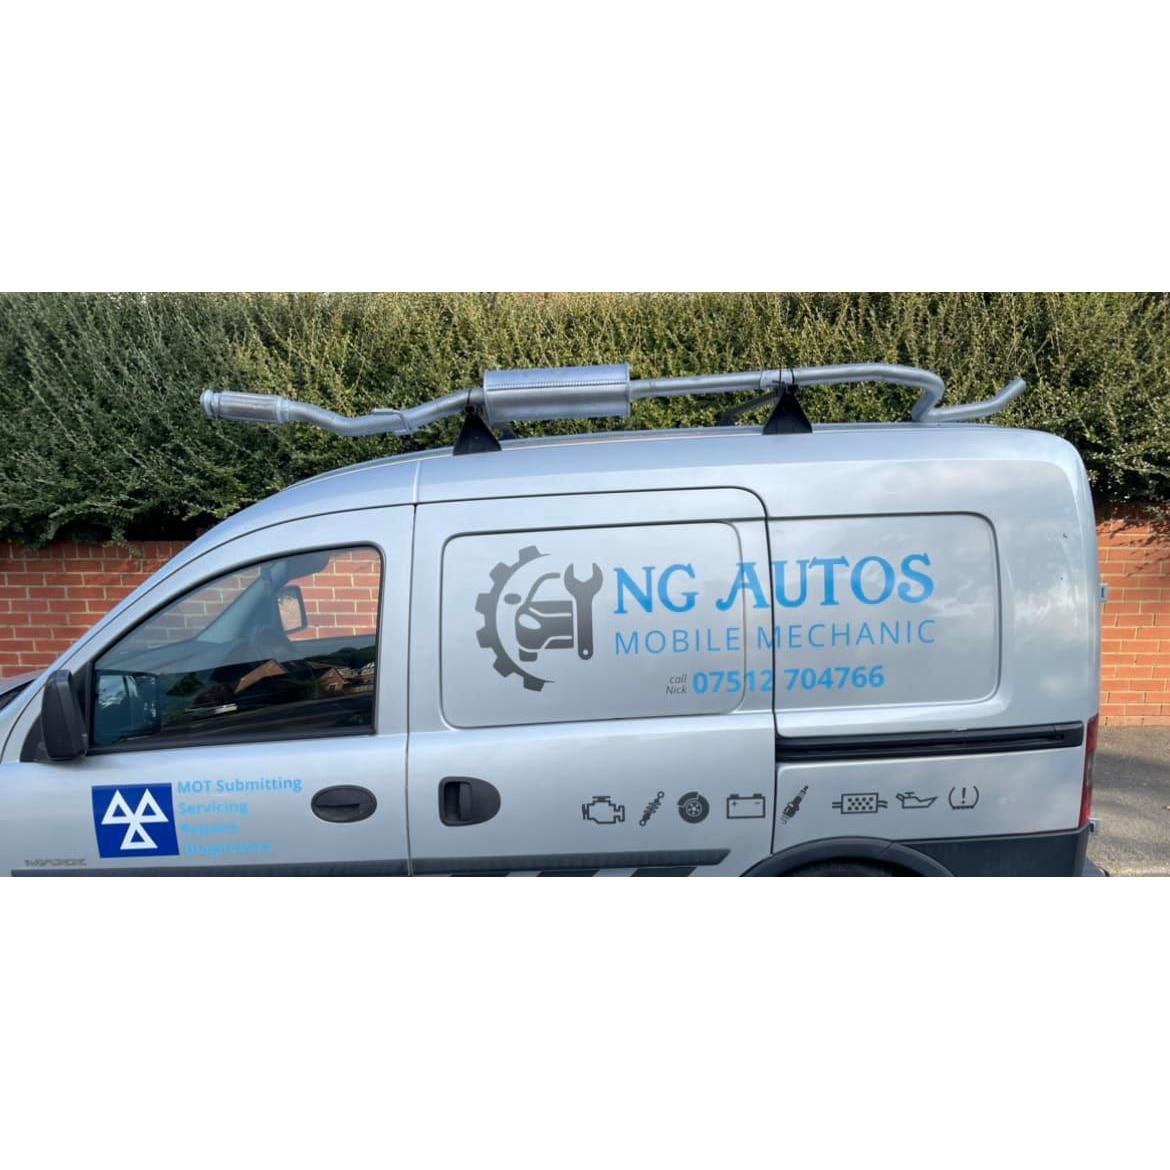 N G Auto's Mobile Mechanic - Wakefield, West Yorkshire WF2 8DH - 07512 704766 | ShowMeLocal.com